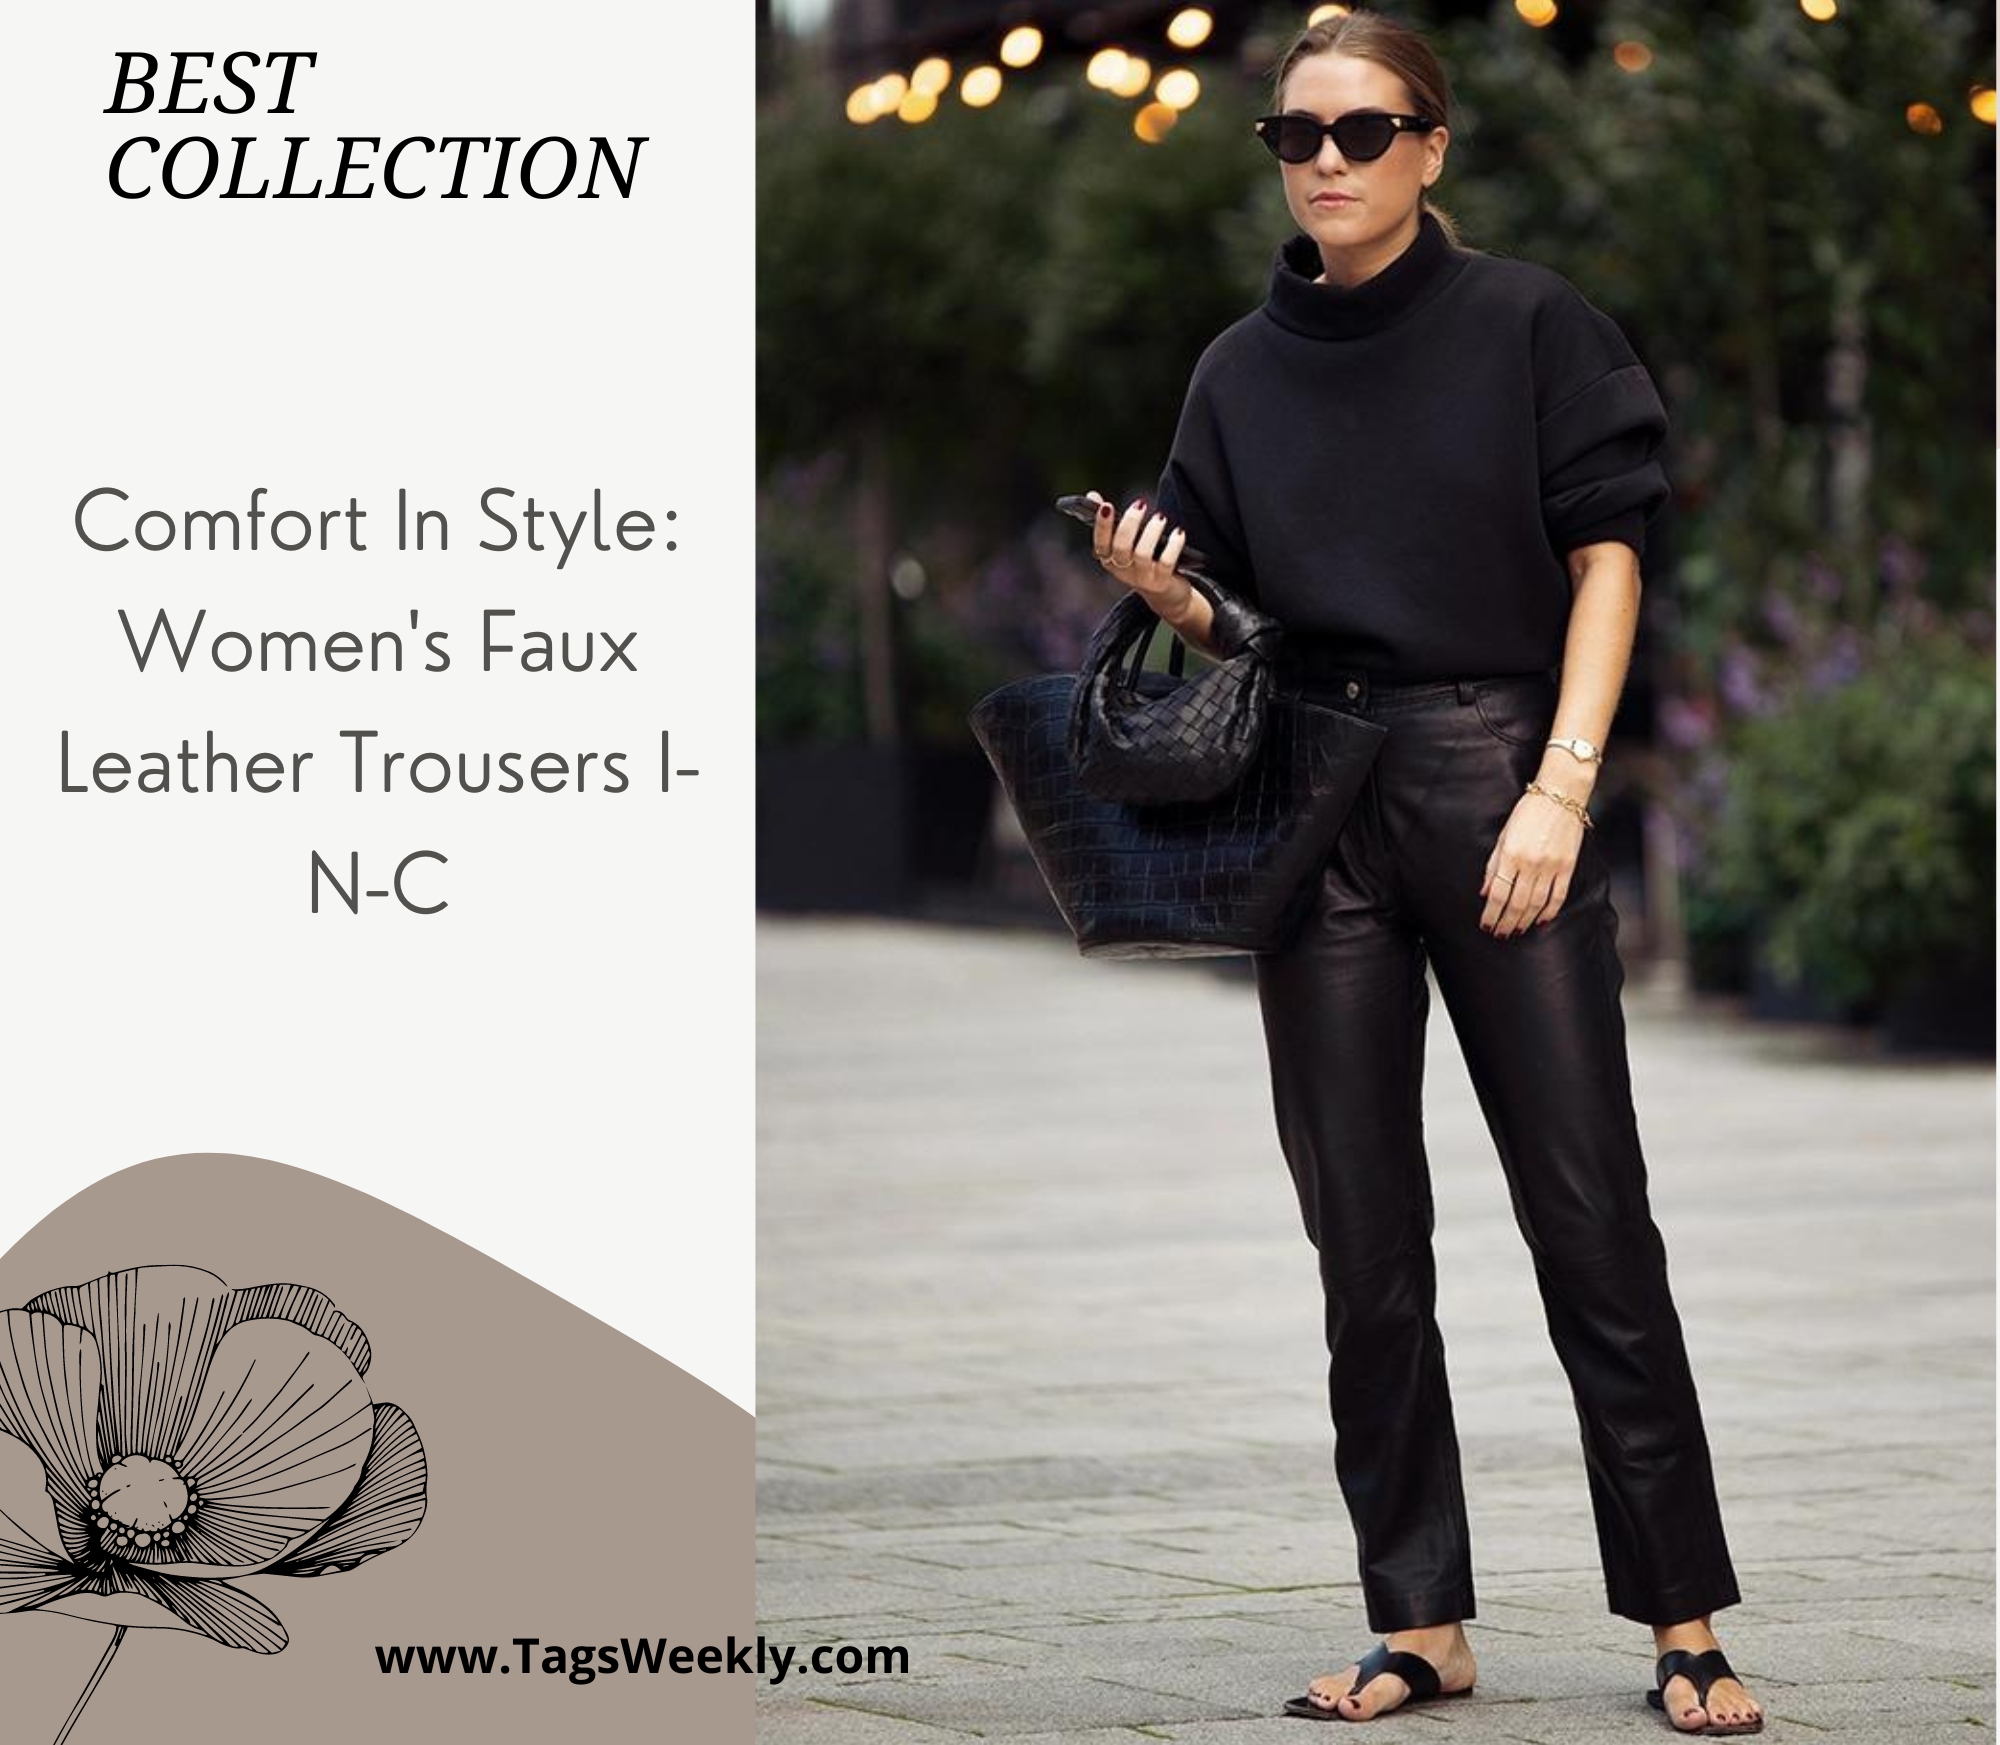 Comfort In Style: Women's Faux Leather Trousers I-N-C - Tagsweekly